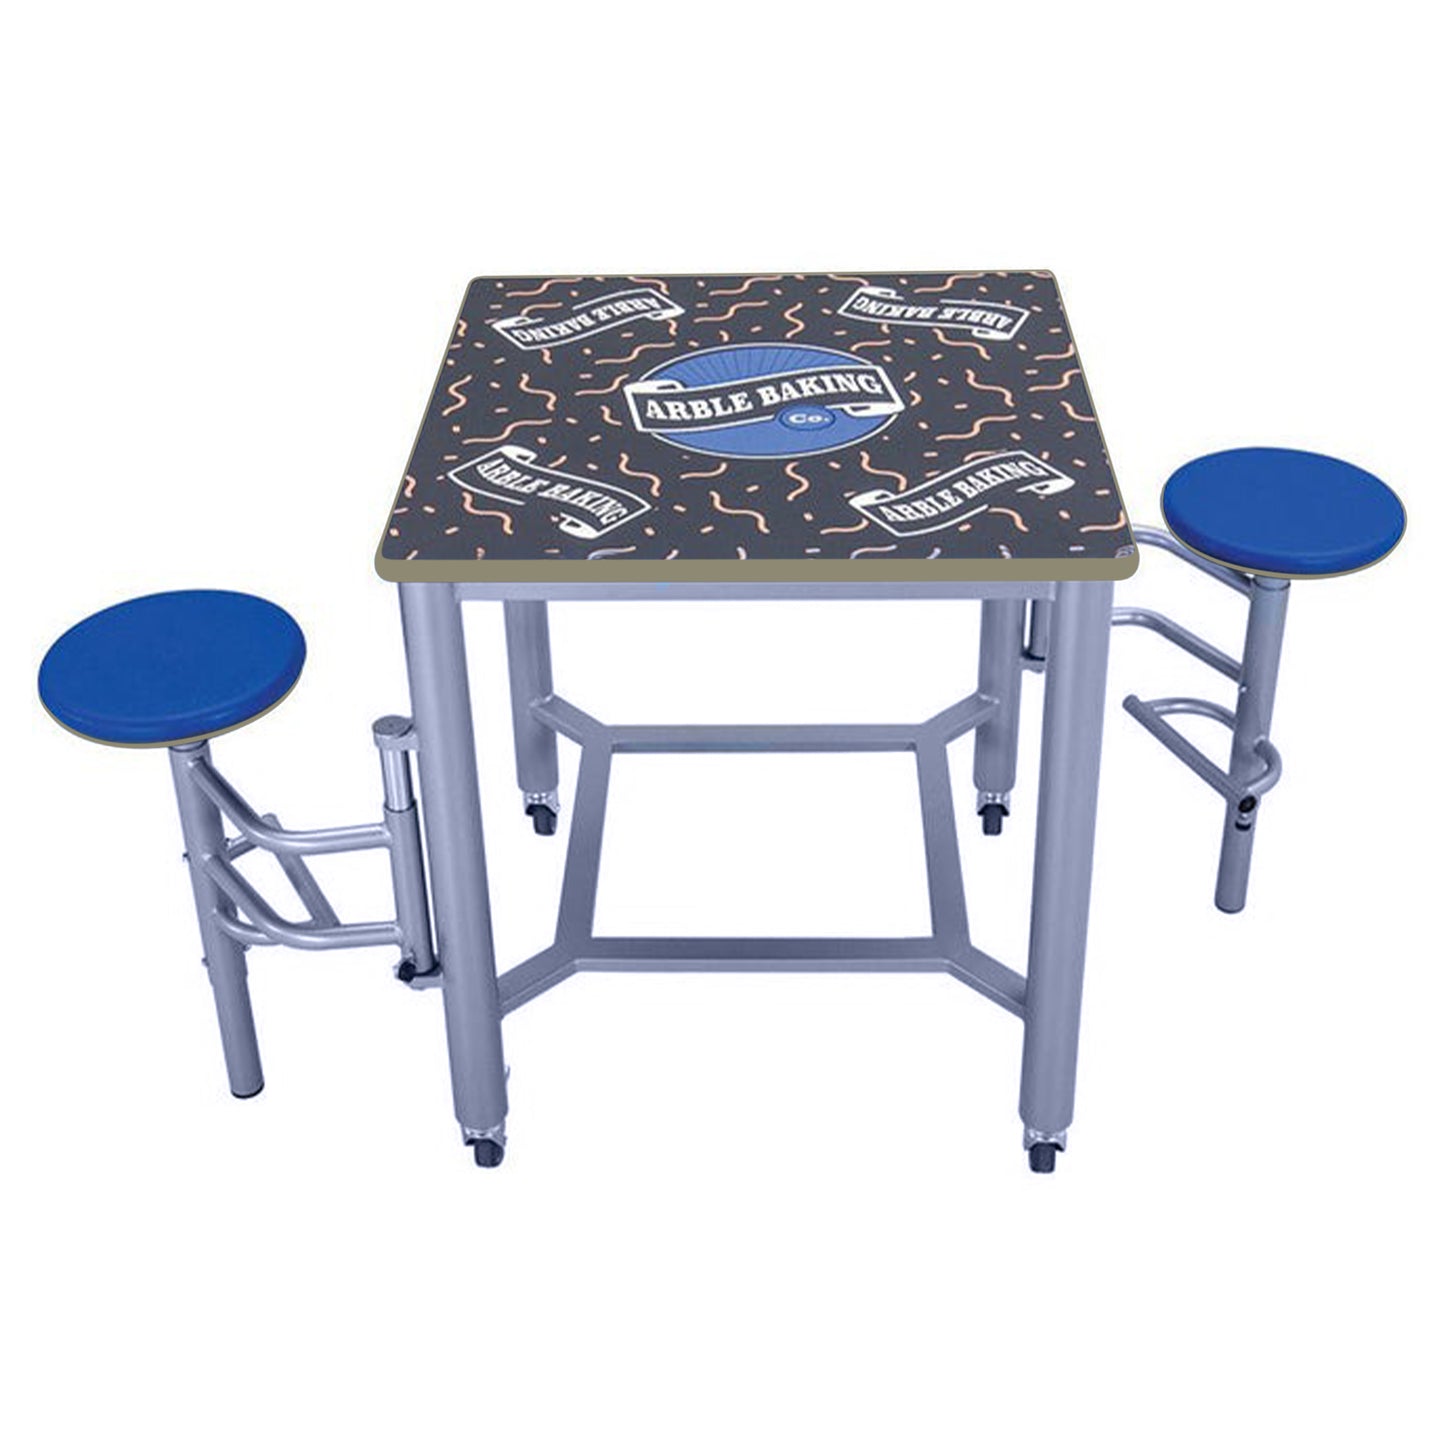 AmTab Mobile Stool Table - Double Collaboration High Table - 36"W x 36"L x 29"H - 2 Stools  (AMT-MDST3636-29)